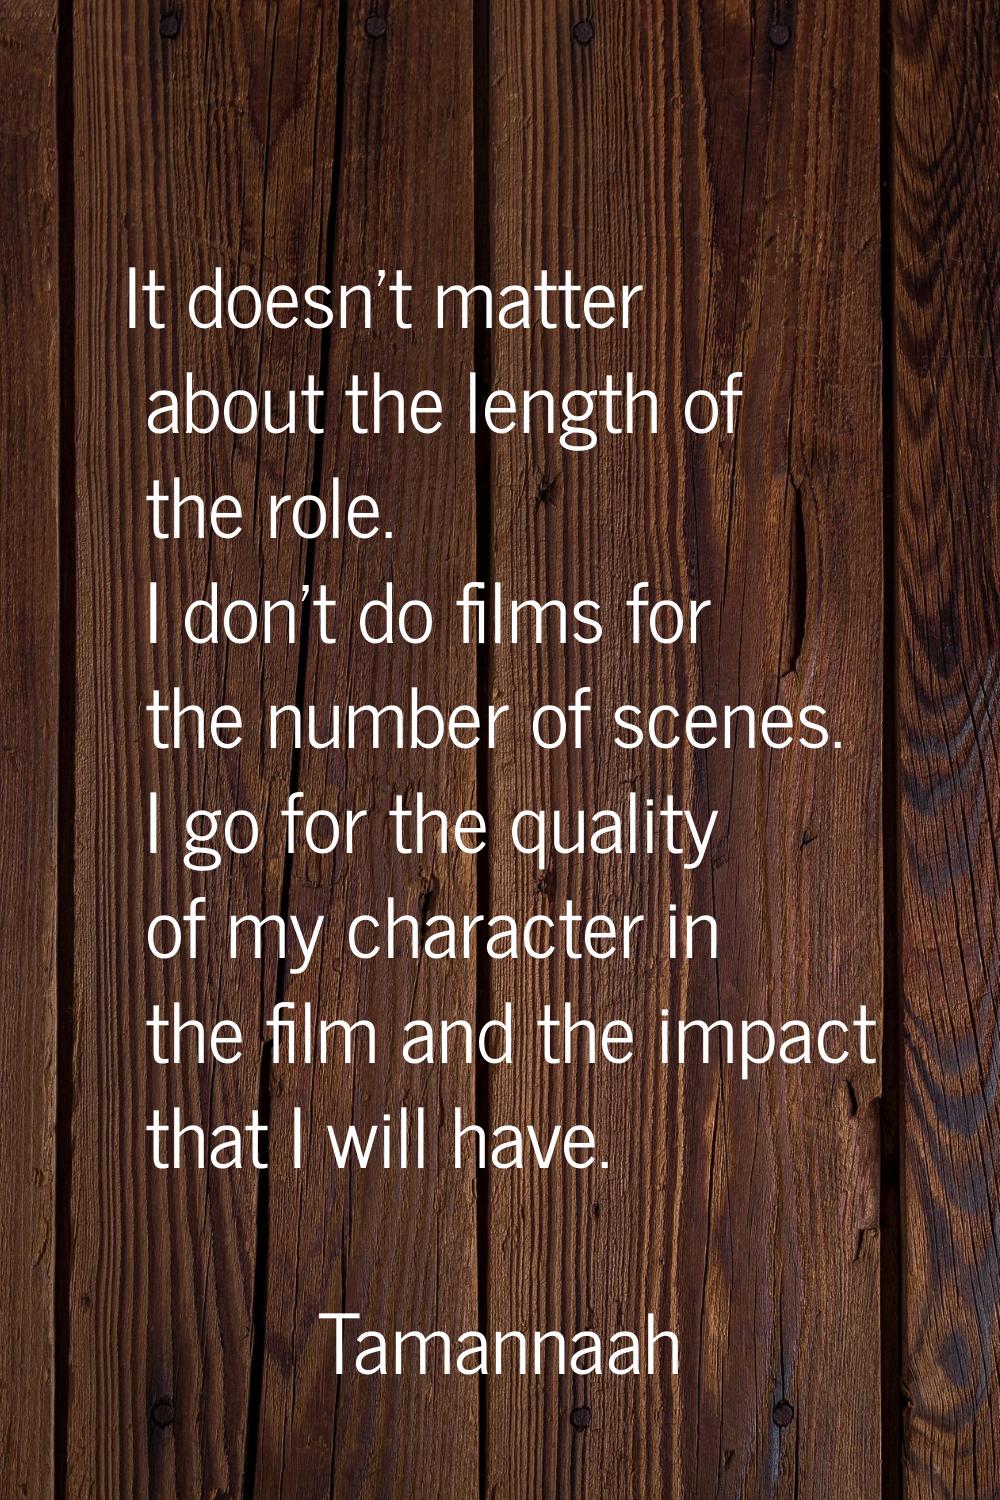 It doesn't matter about the length of the role. I don't do films for the number of scenes. I go for